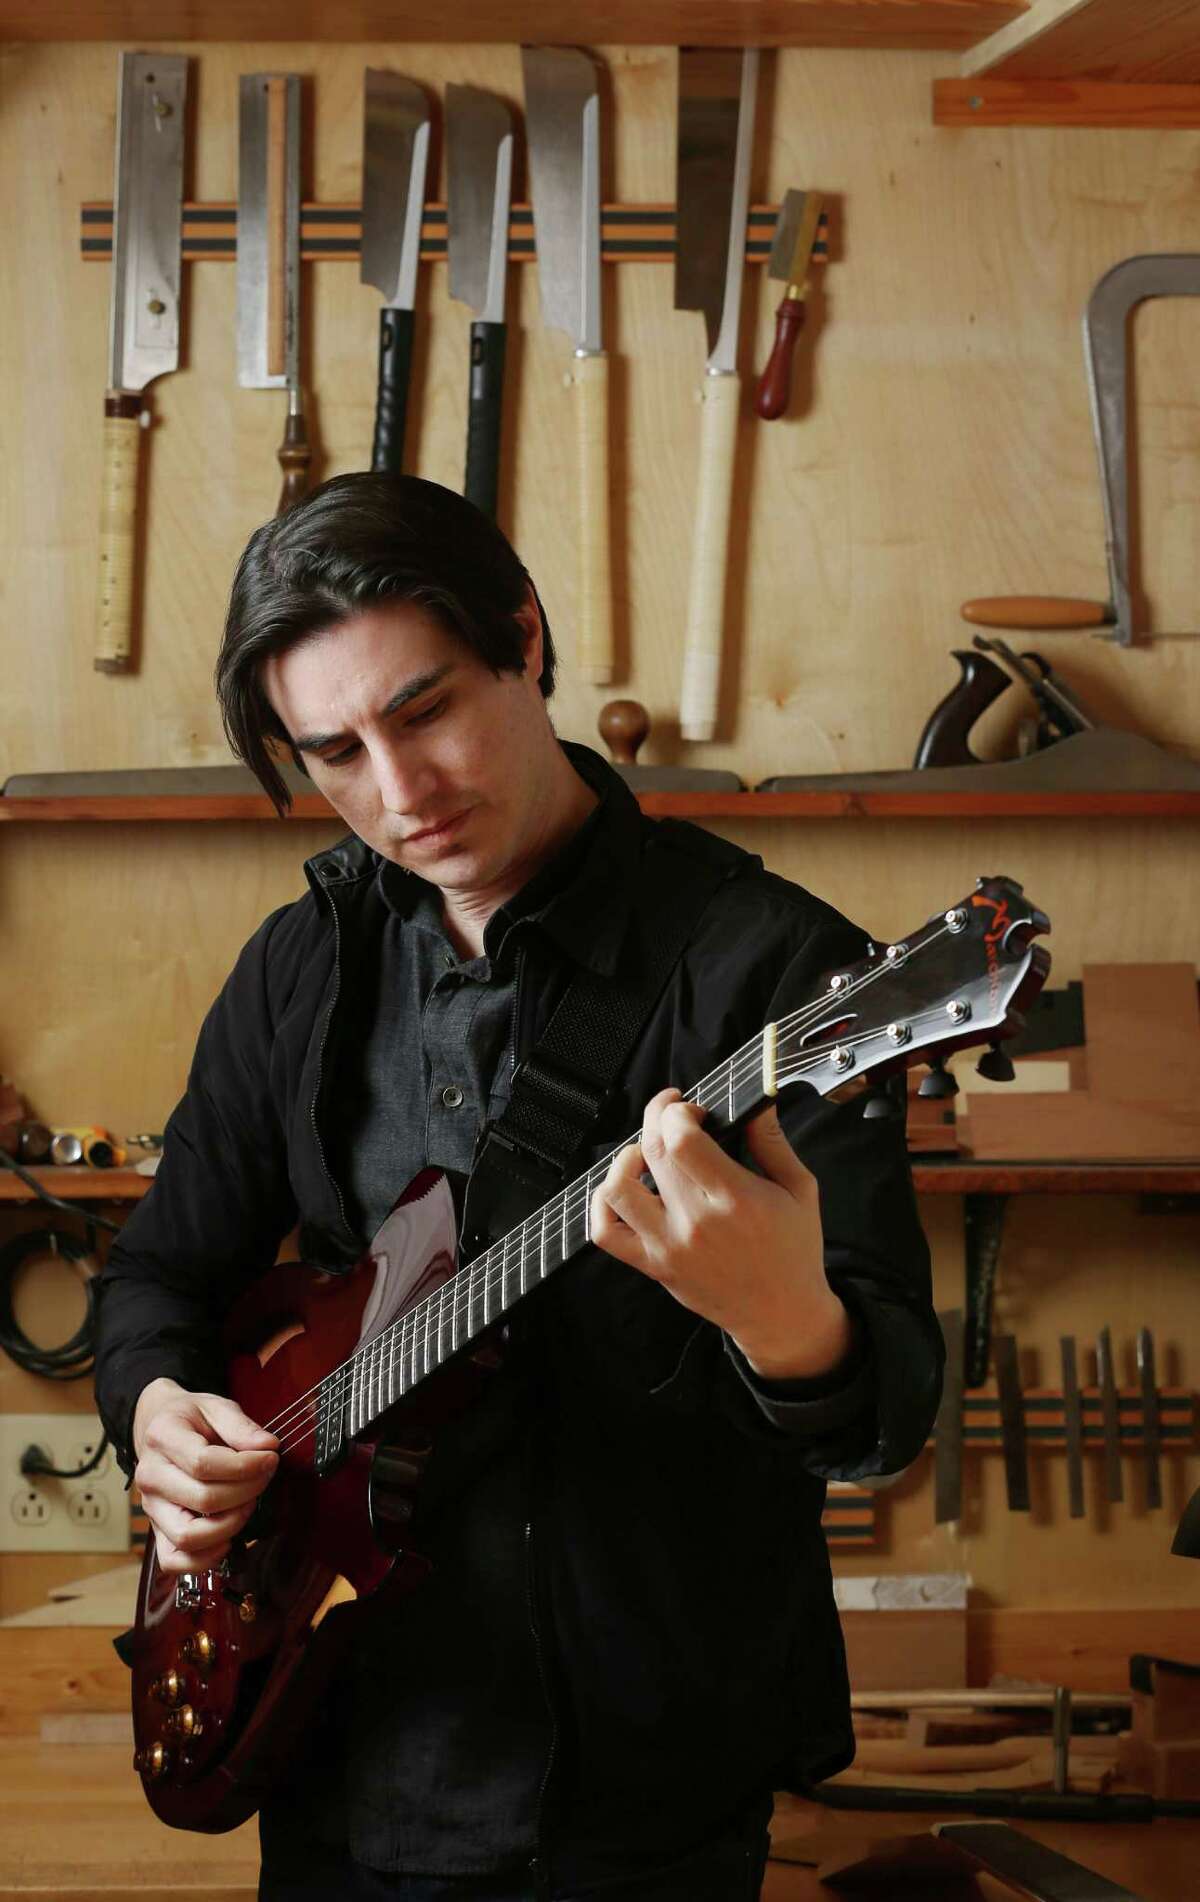 Mike Moreno poses for a portrait the shop of luthier Stephen Marchione Thursday, Feb. 11, 2016, in Houston. Moreno is an alum of the High School for the Performing and Visual Arts. ( Jon Shapley / Houston Chronicle )